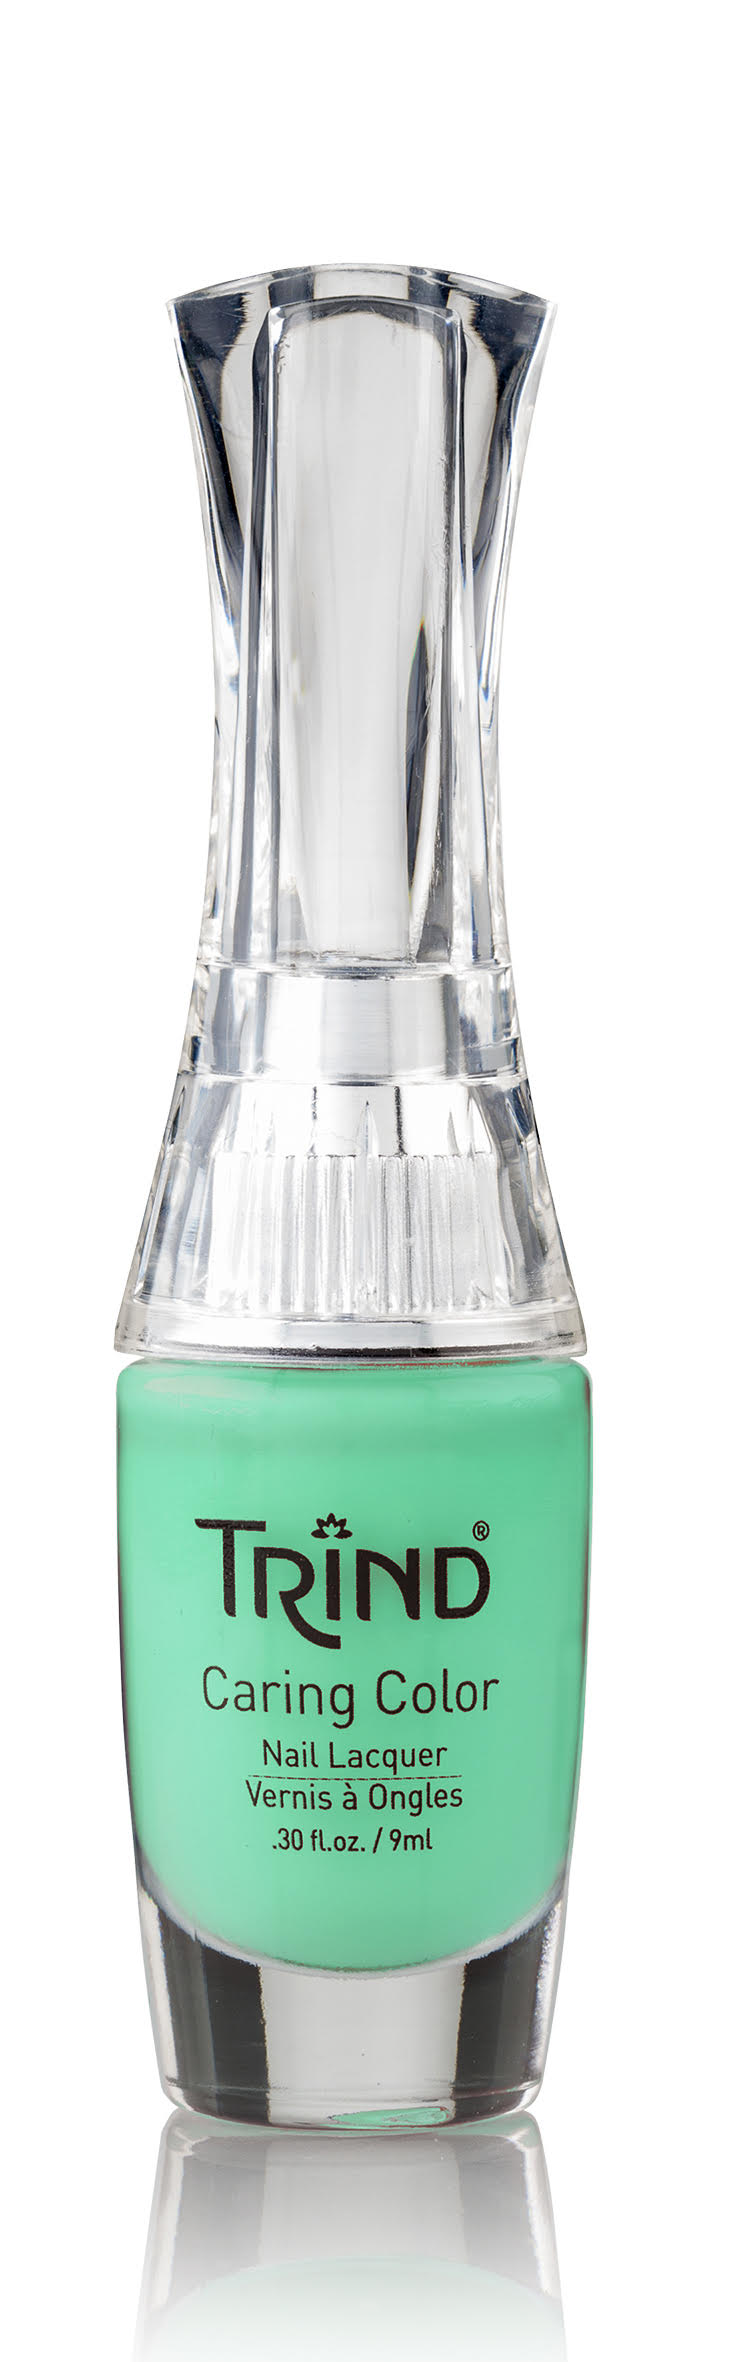 Trind Caring Color Nail Lacquer CC214